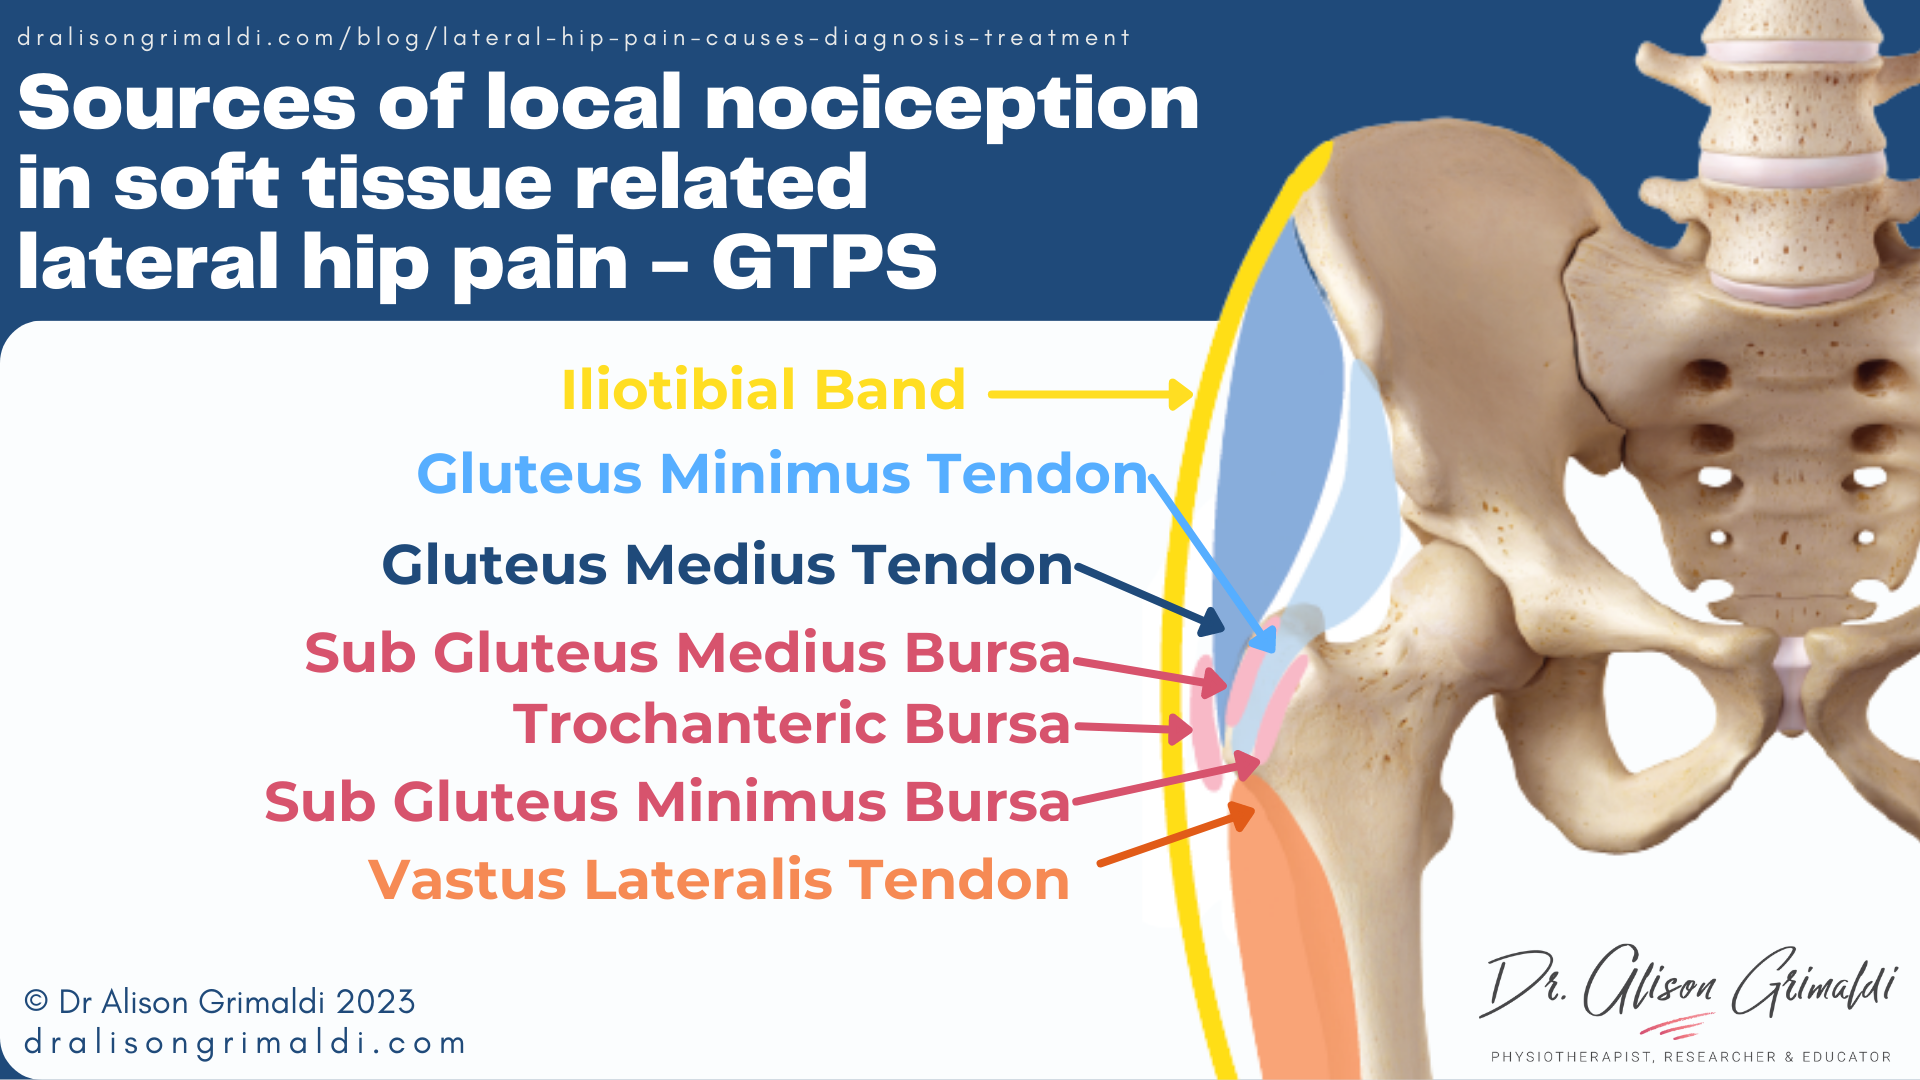 Sources-of-local-nociception-in-soft-tissue-related-lateral-hip-pain-GTPS